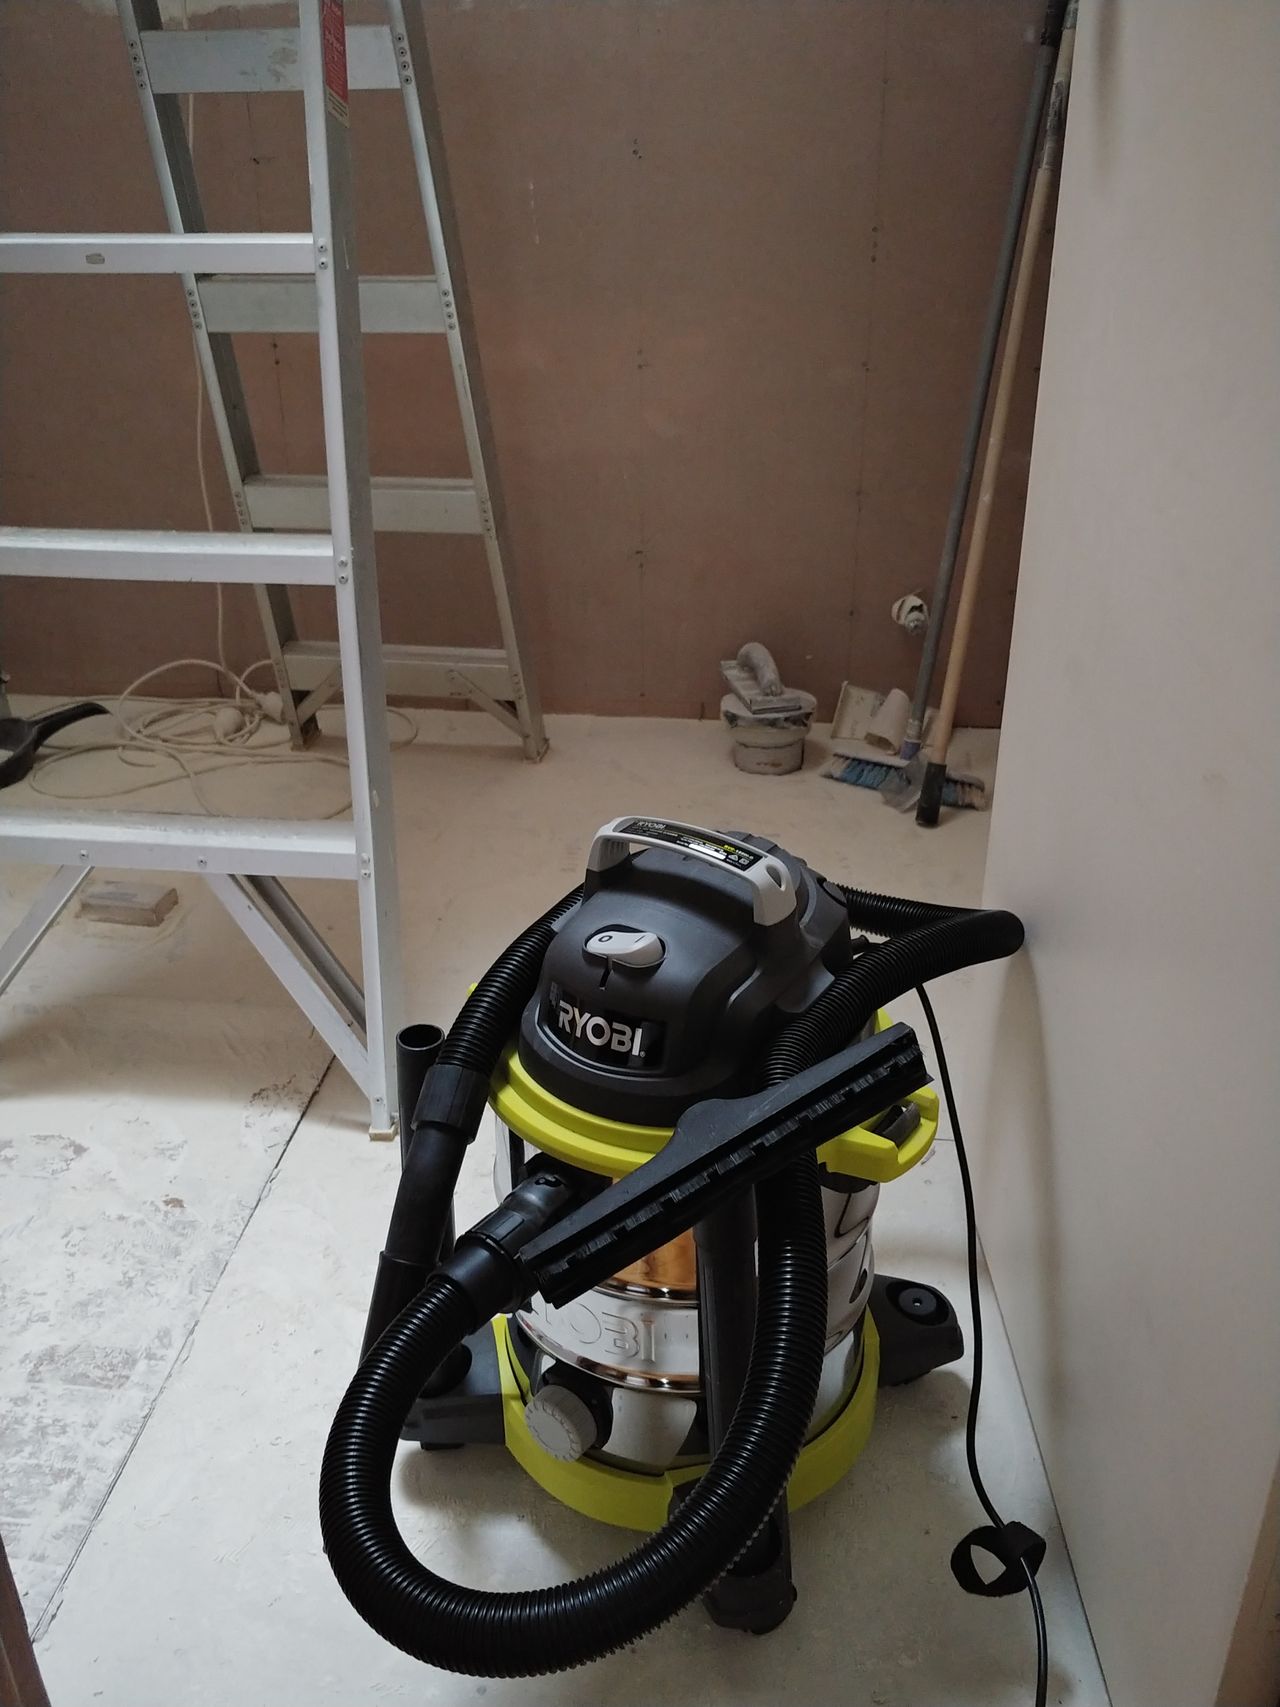 Time to suck up some sanding dust with Ryobi's finest vac!